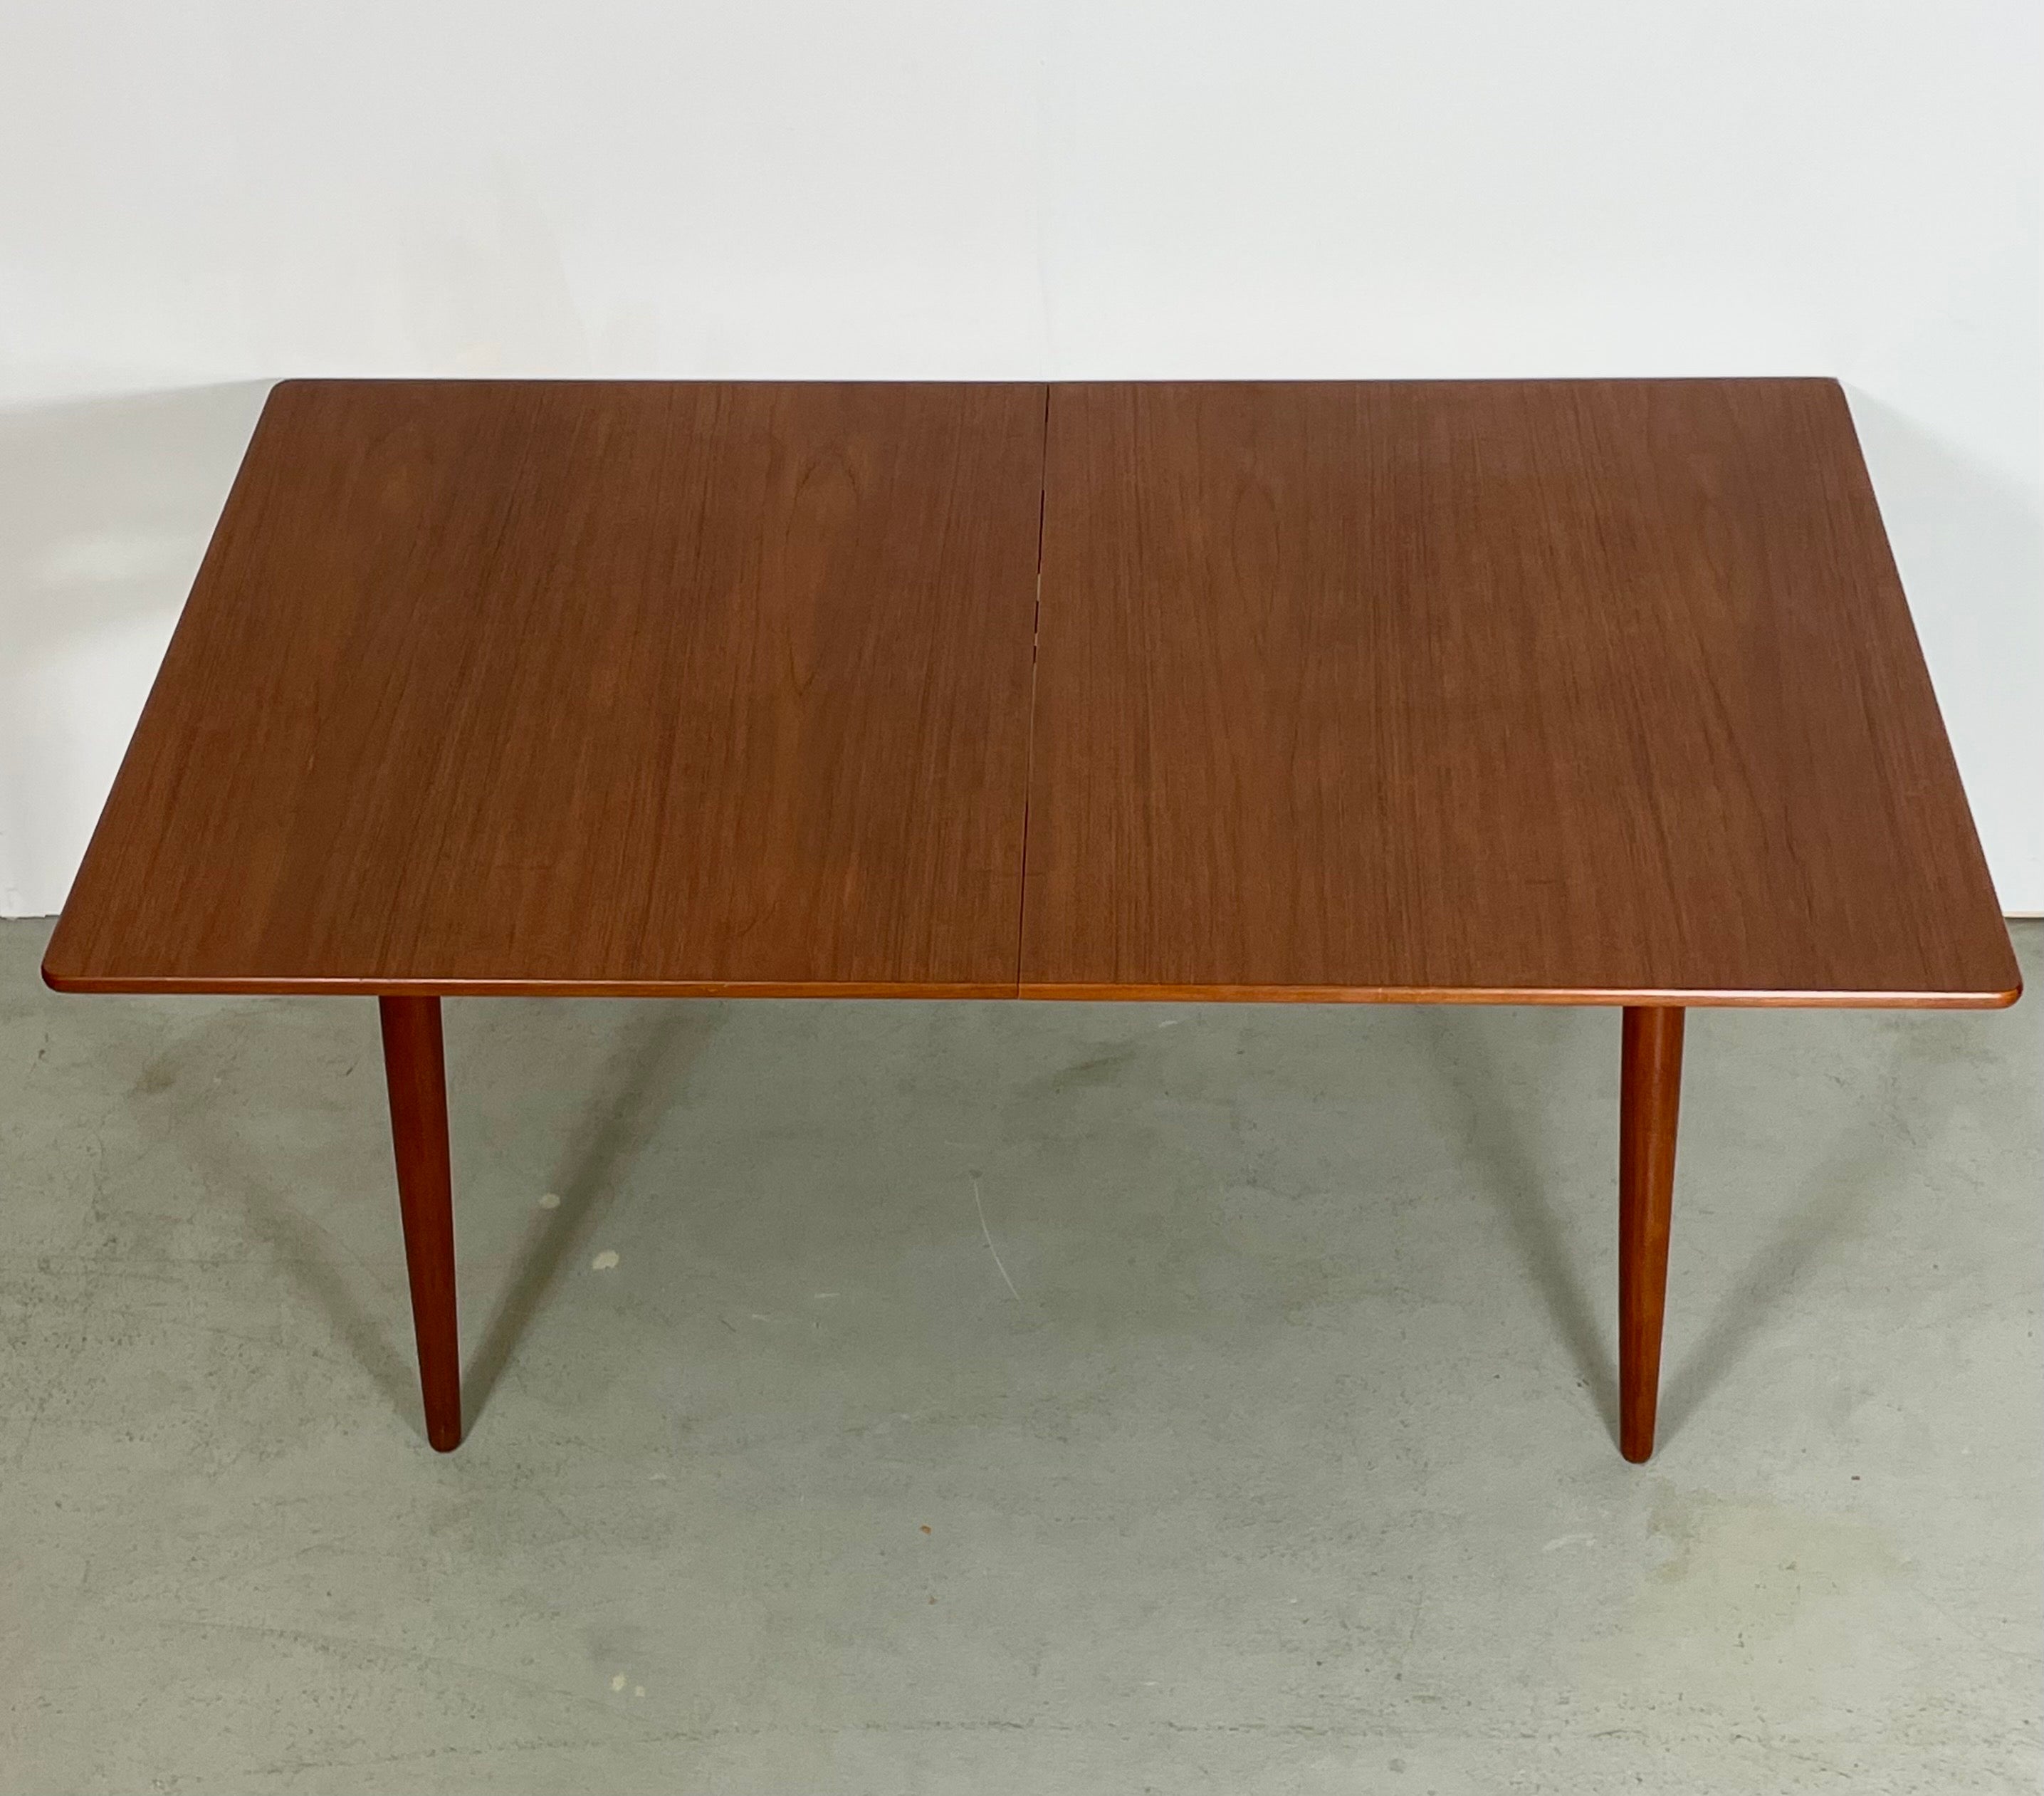 This is a beautiful and very rare large edition of model AT 310. A dining table designed by Hans J. Wegner, produced by Andreas Tuck in Denmark. Equipped with 2 separate extension leaves of 40 cm each. Legs and table top in teak. In perfect vintage